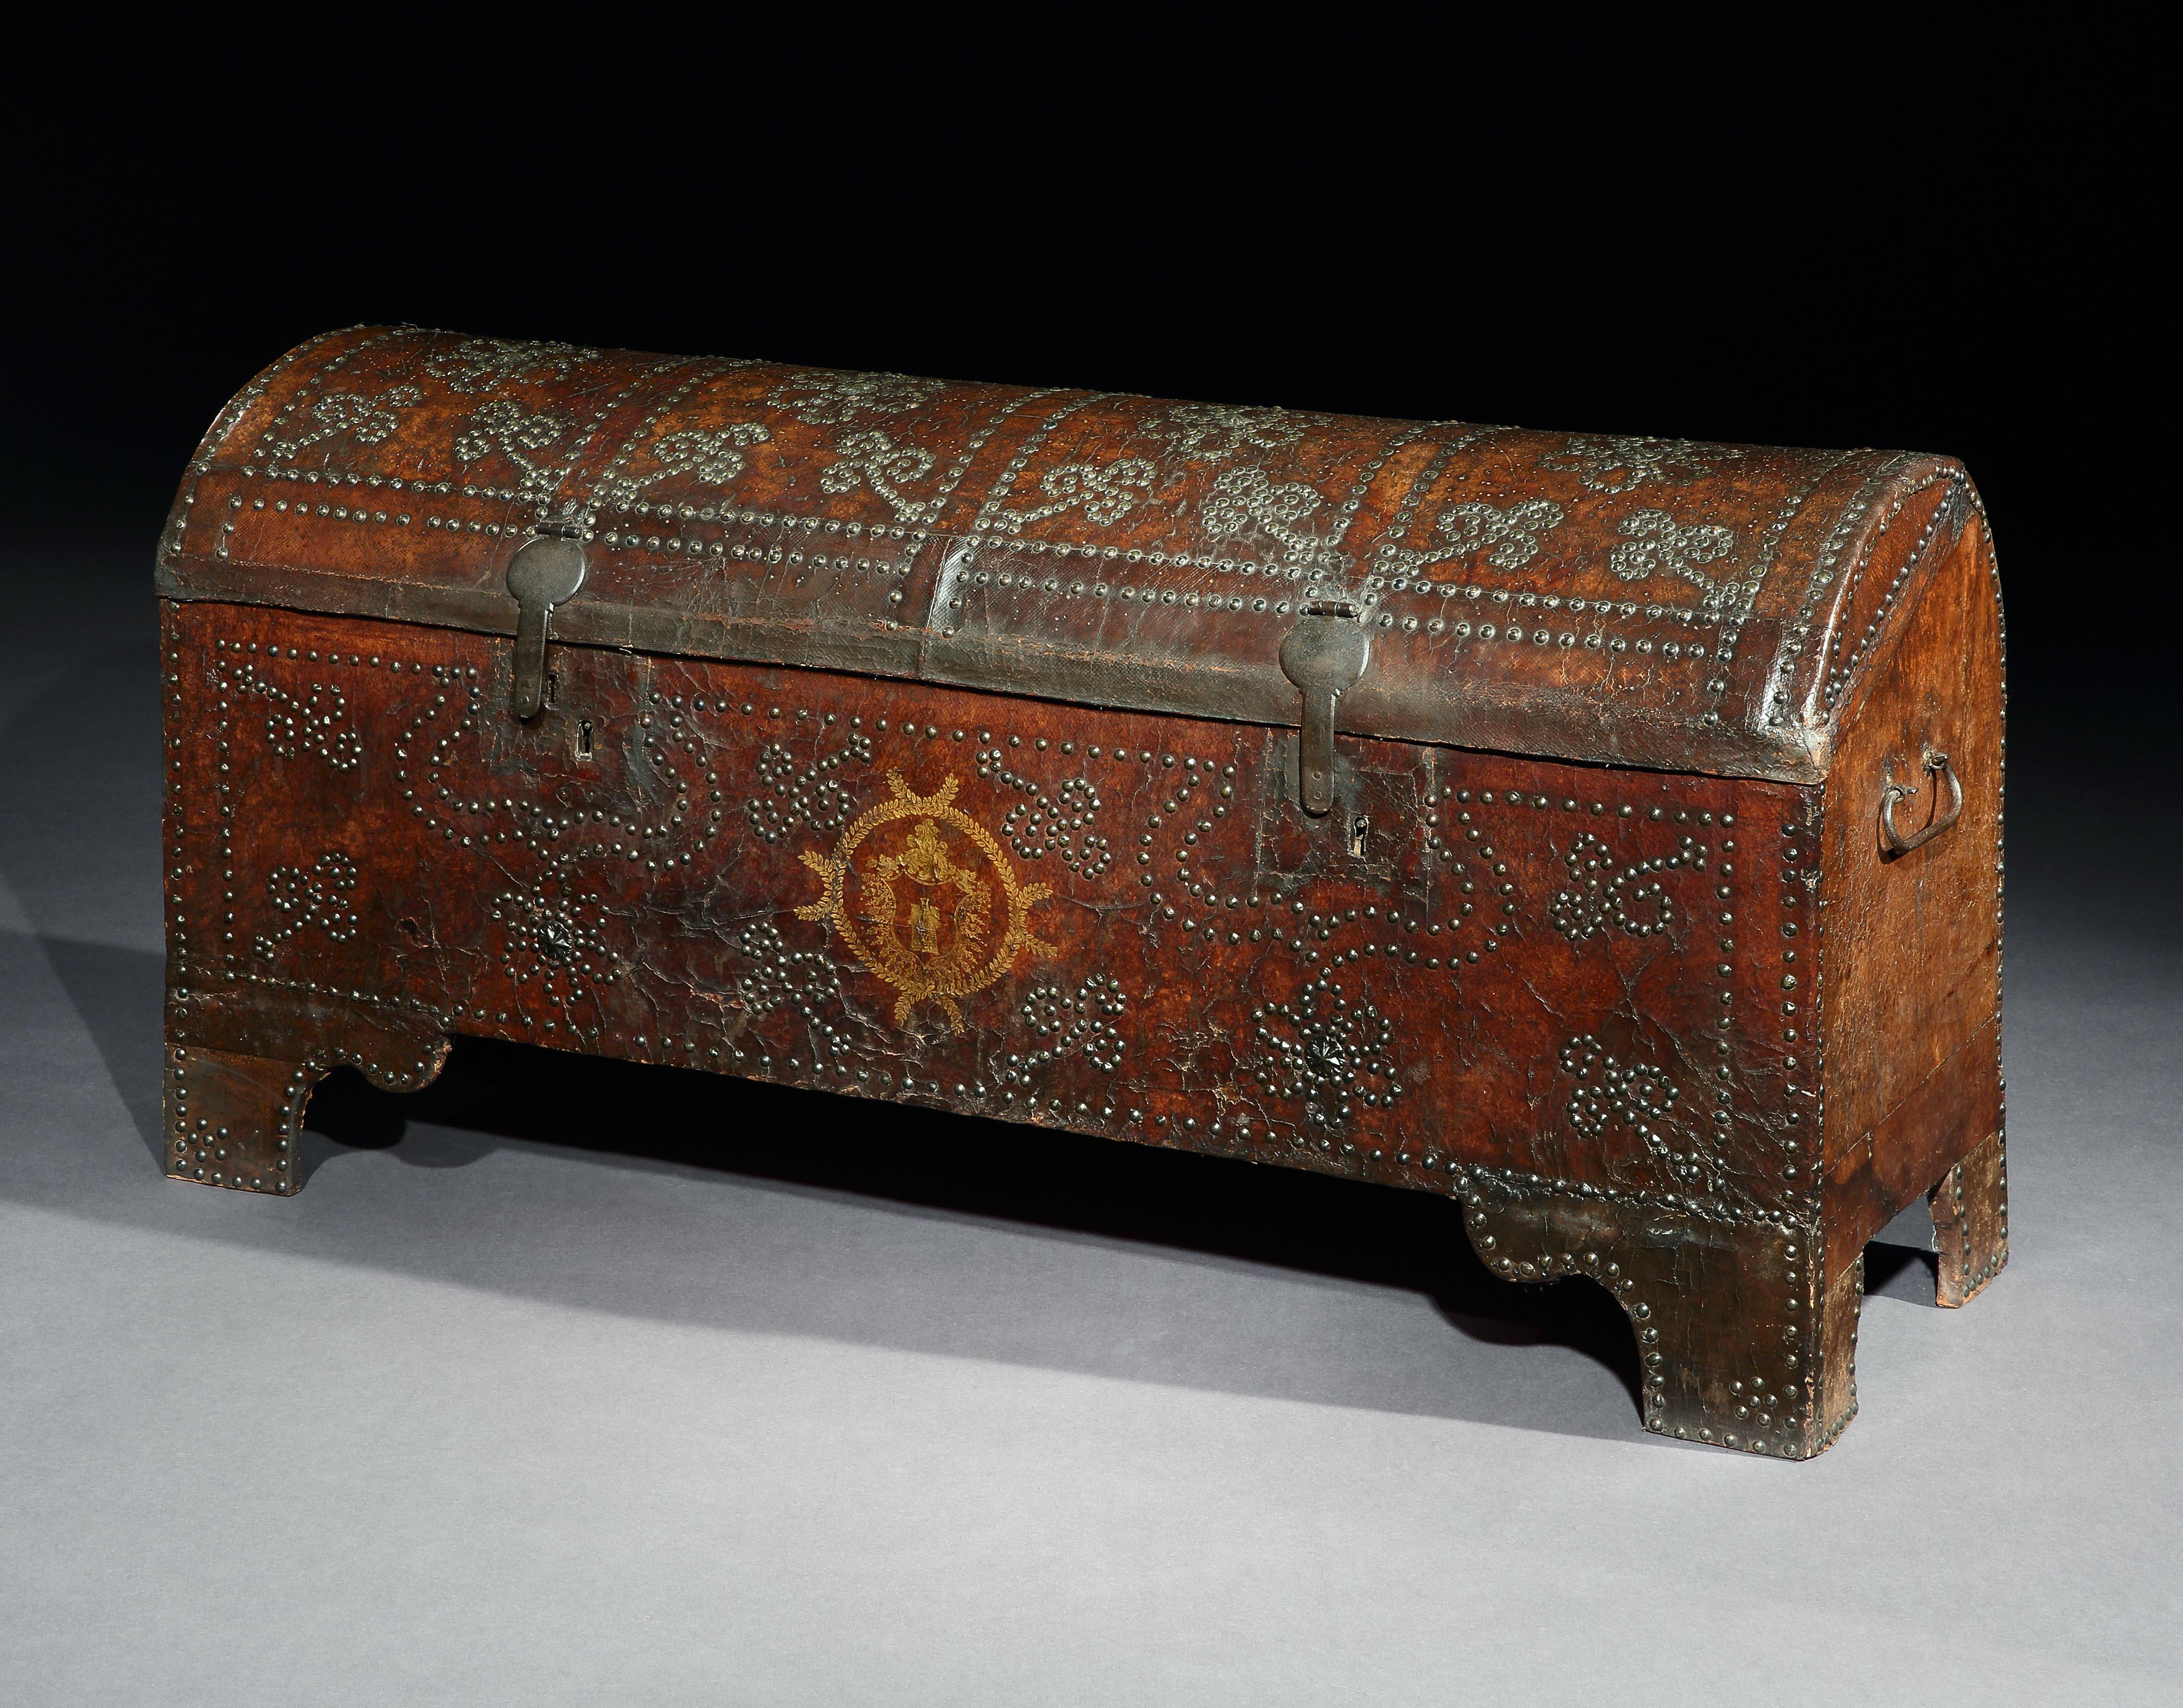 Rare, early 17th century, Spanish, leather, ‘Arcon’ or domed travelling coffer with a gilded armorial & ornamented with brass studwork.

Surviving utalitarian pieces such as travelling coffers from this period and in this condition are rare. It is